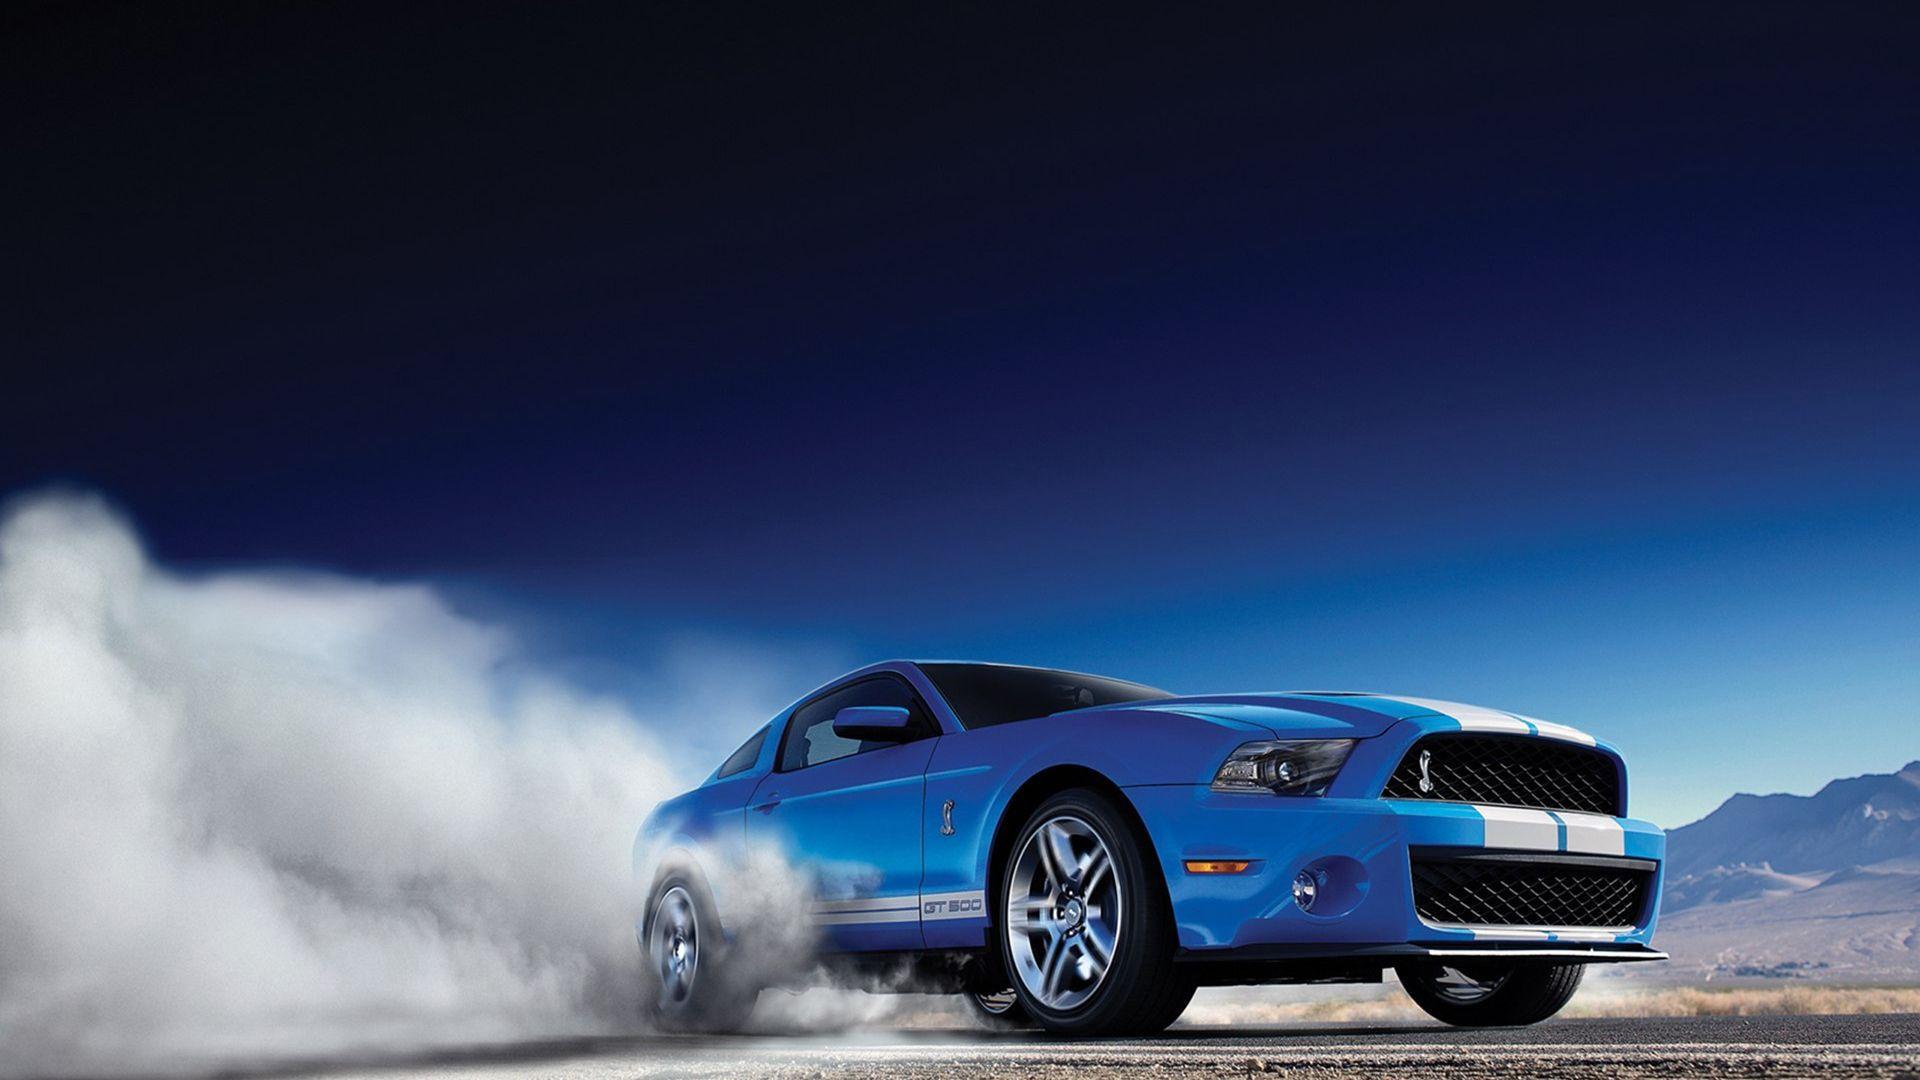 2015 Ford Mustang Shelby Wallpapers 1920x1080